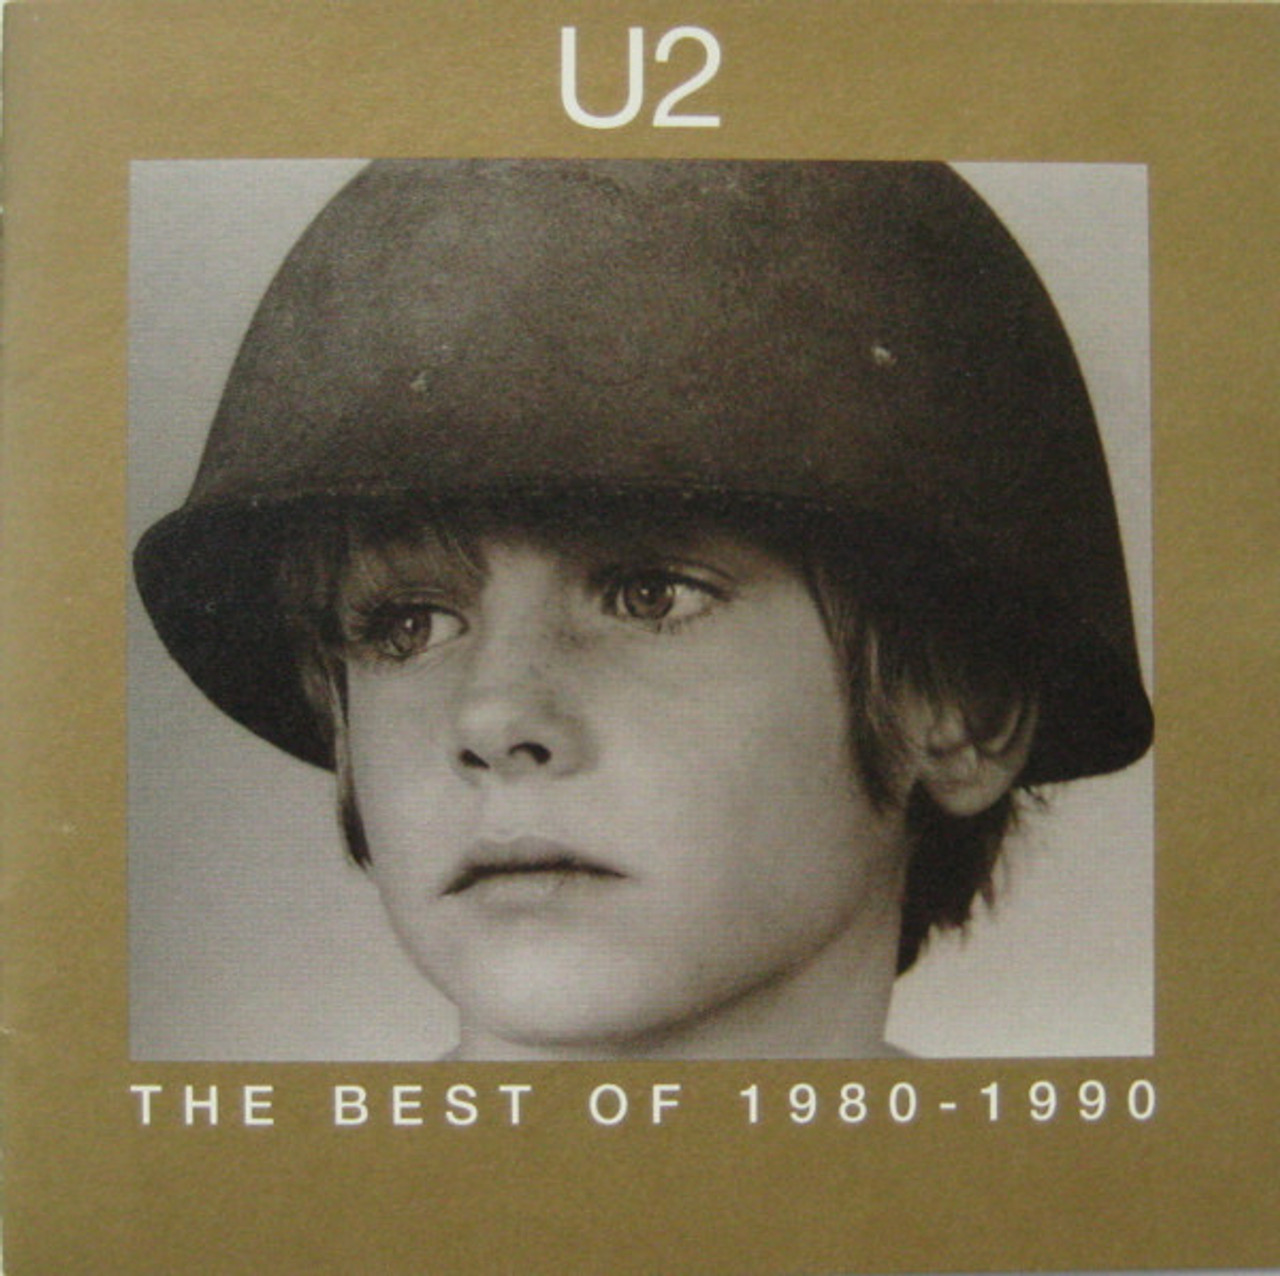 *USED* THE BEST OF 1980-1990 - U2 (#731452461223)